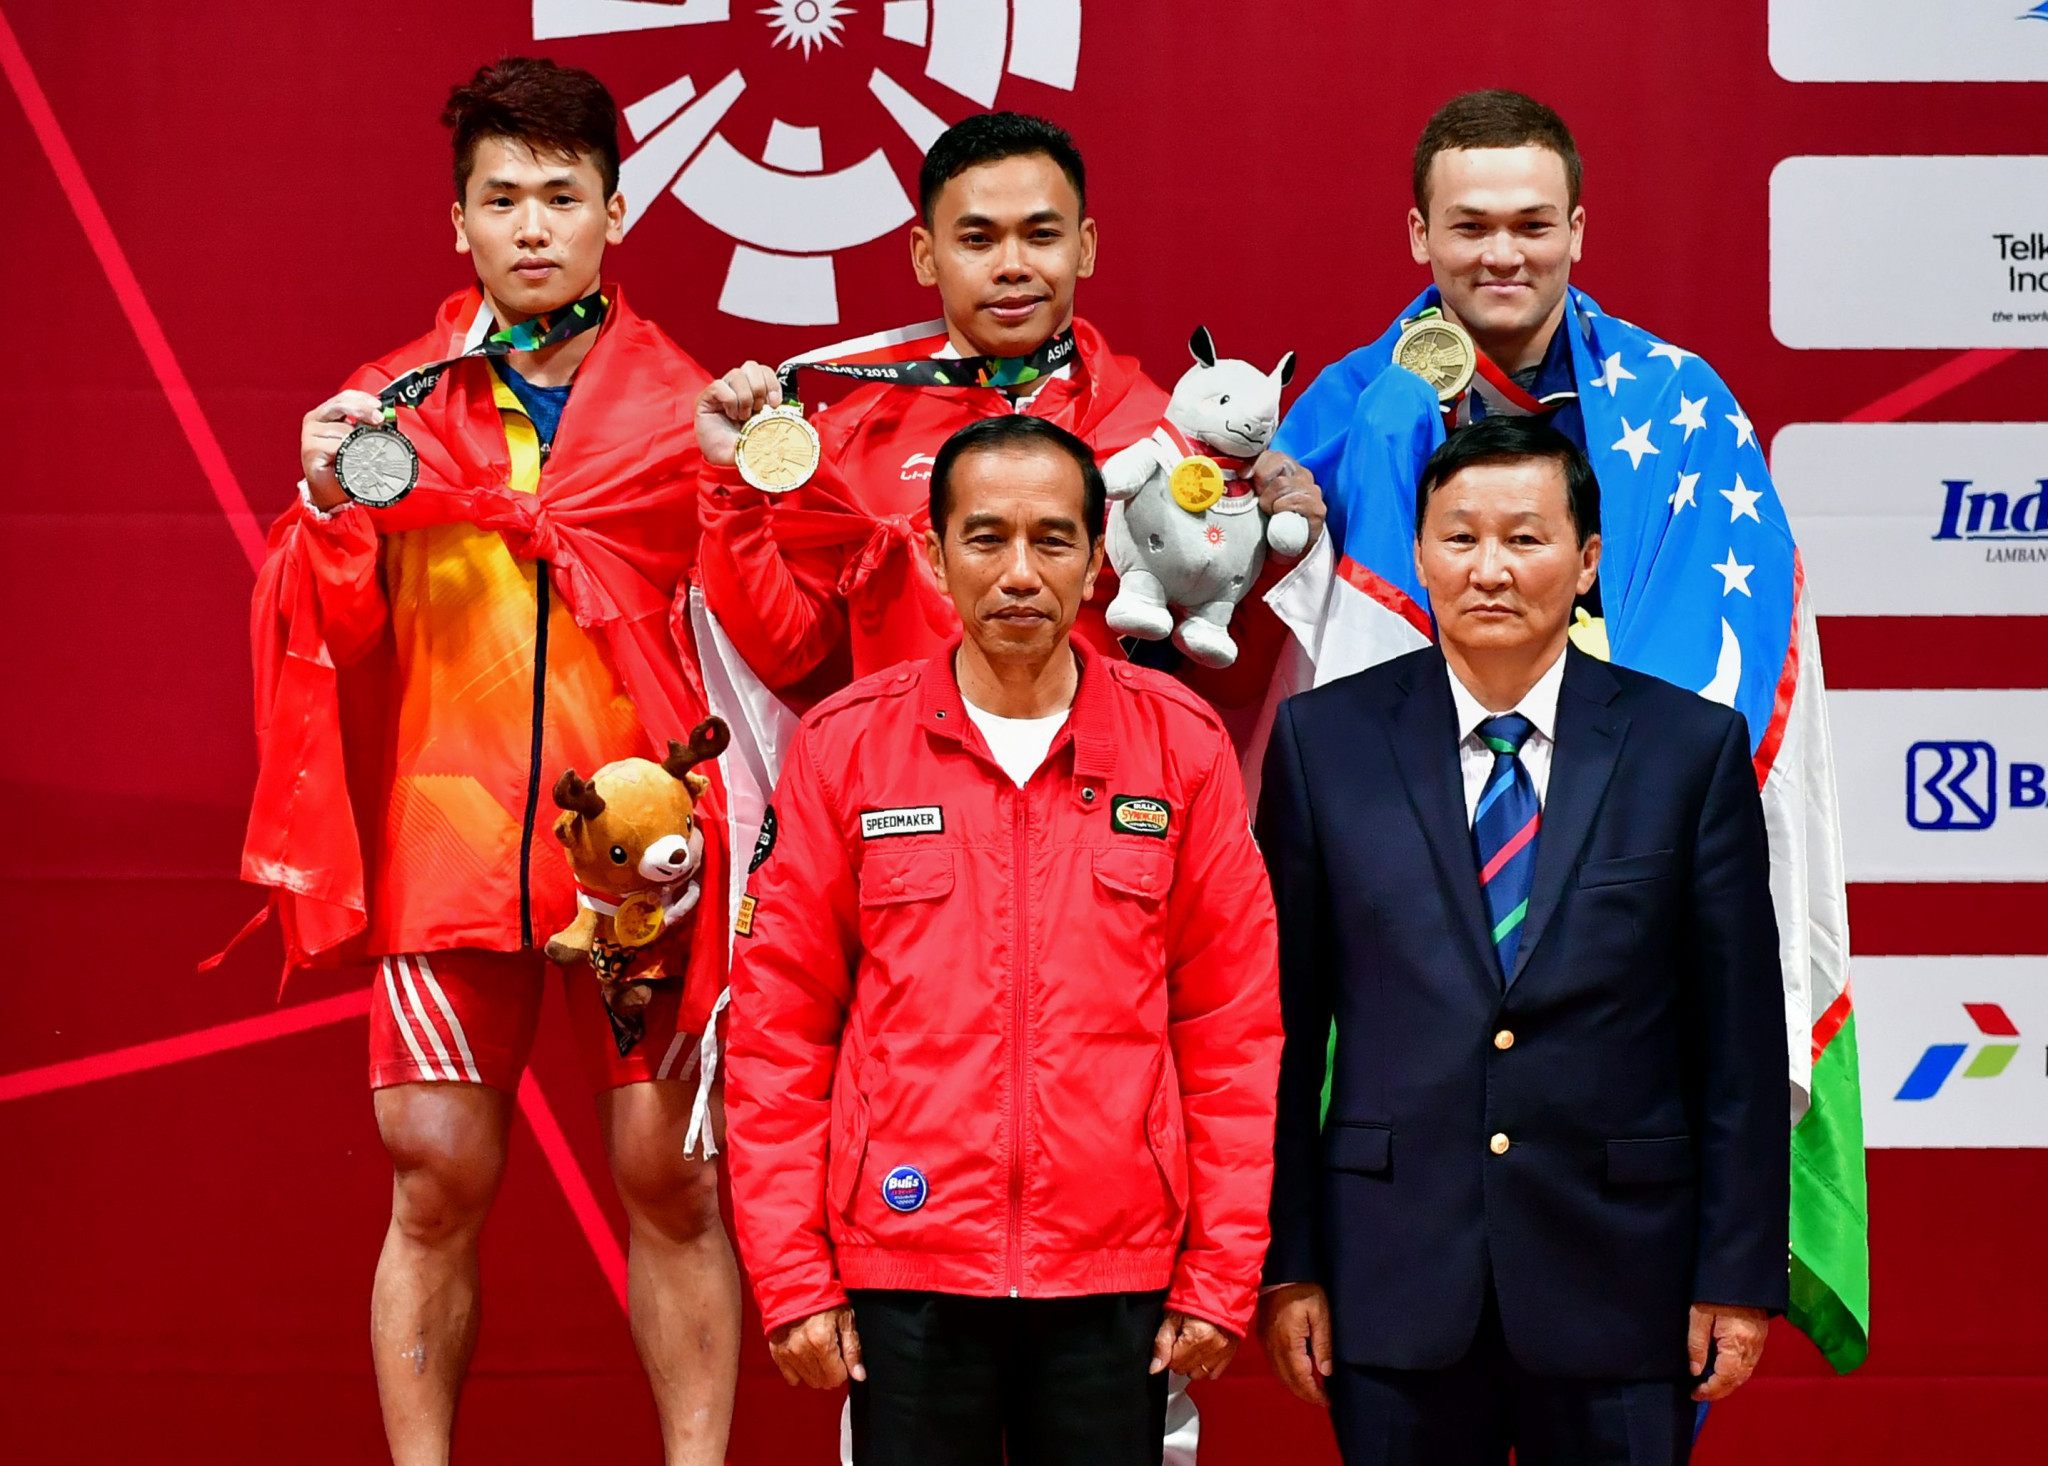 Indonesia President Joko Widodo, front left, was among the spectators as home favourite Eko Yuli Irawan, back centre, won the men’s 62 kilograms weightlifting event here at the 2018 Asian Games today ©Getty Images